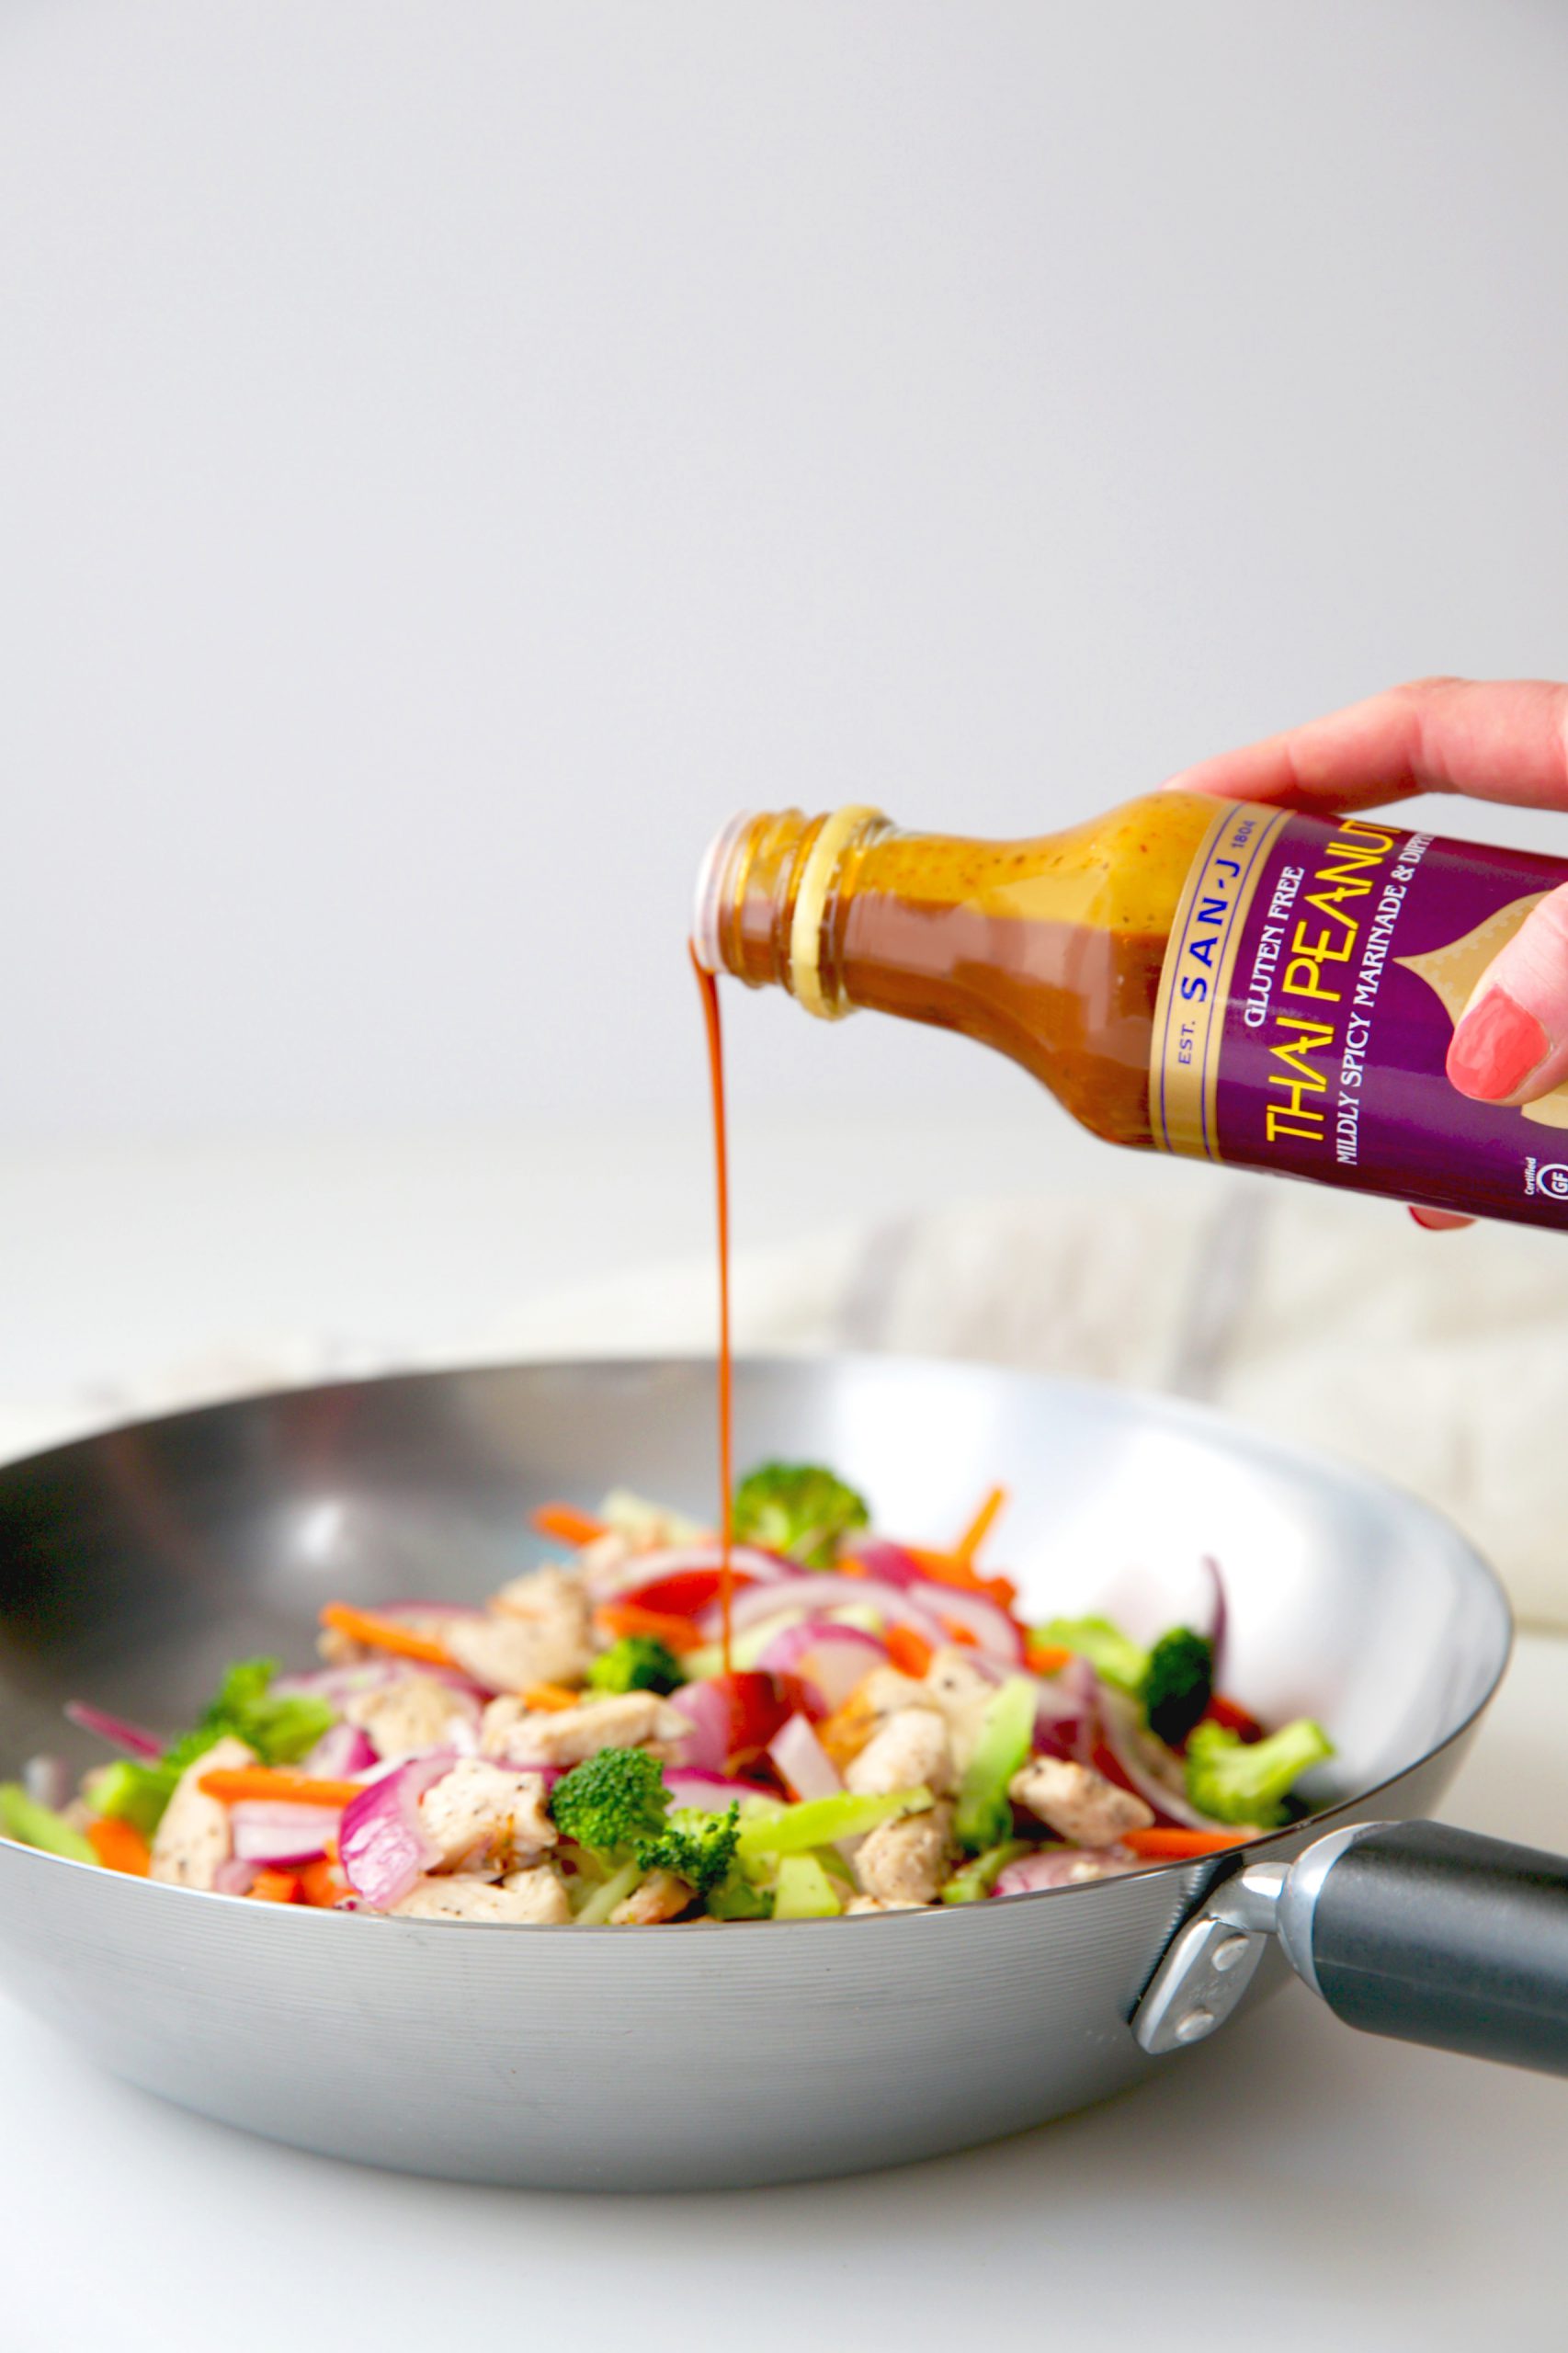 Easy stir-fy with San-J Asian Cooking Sauce